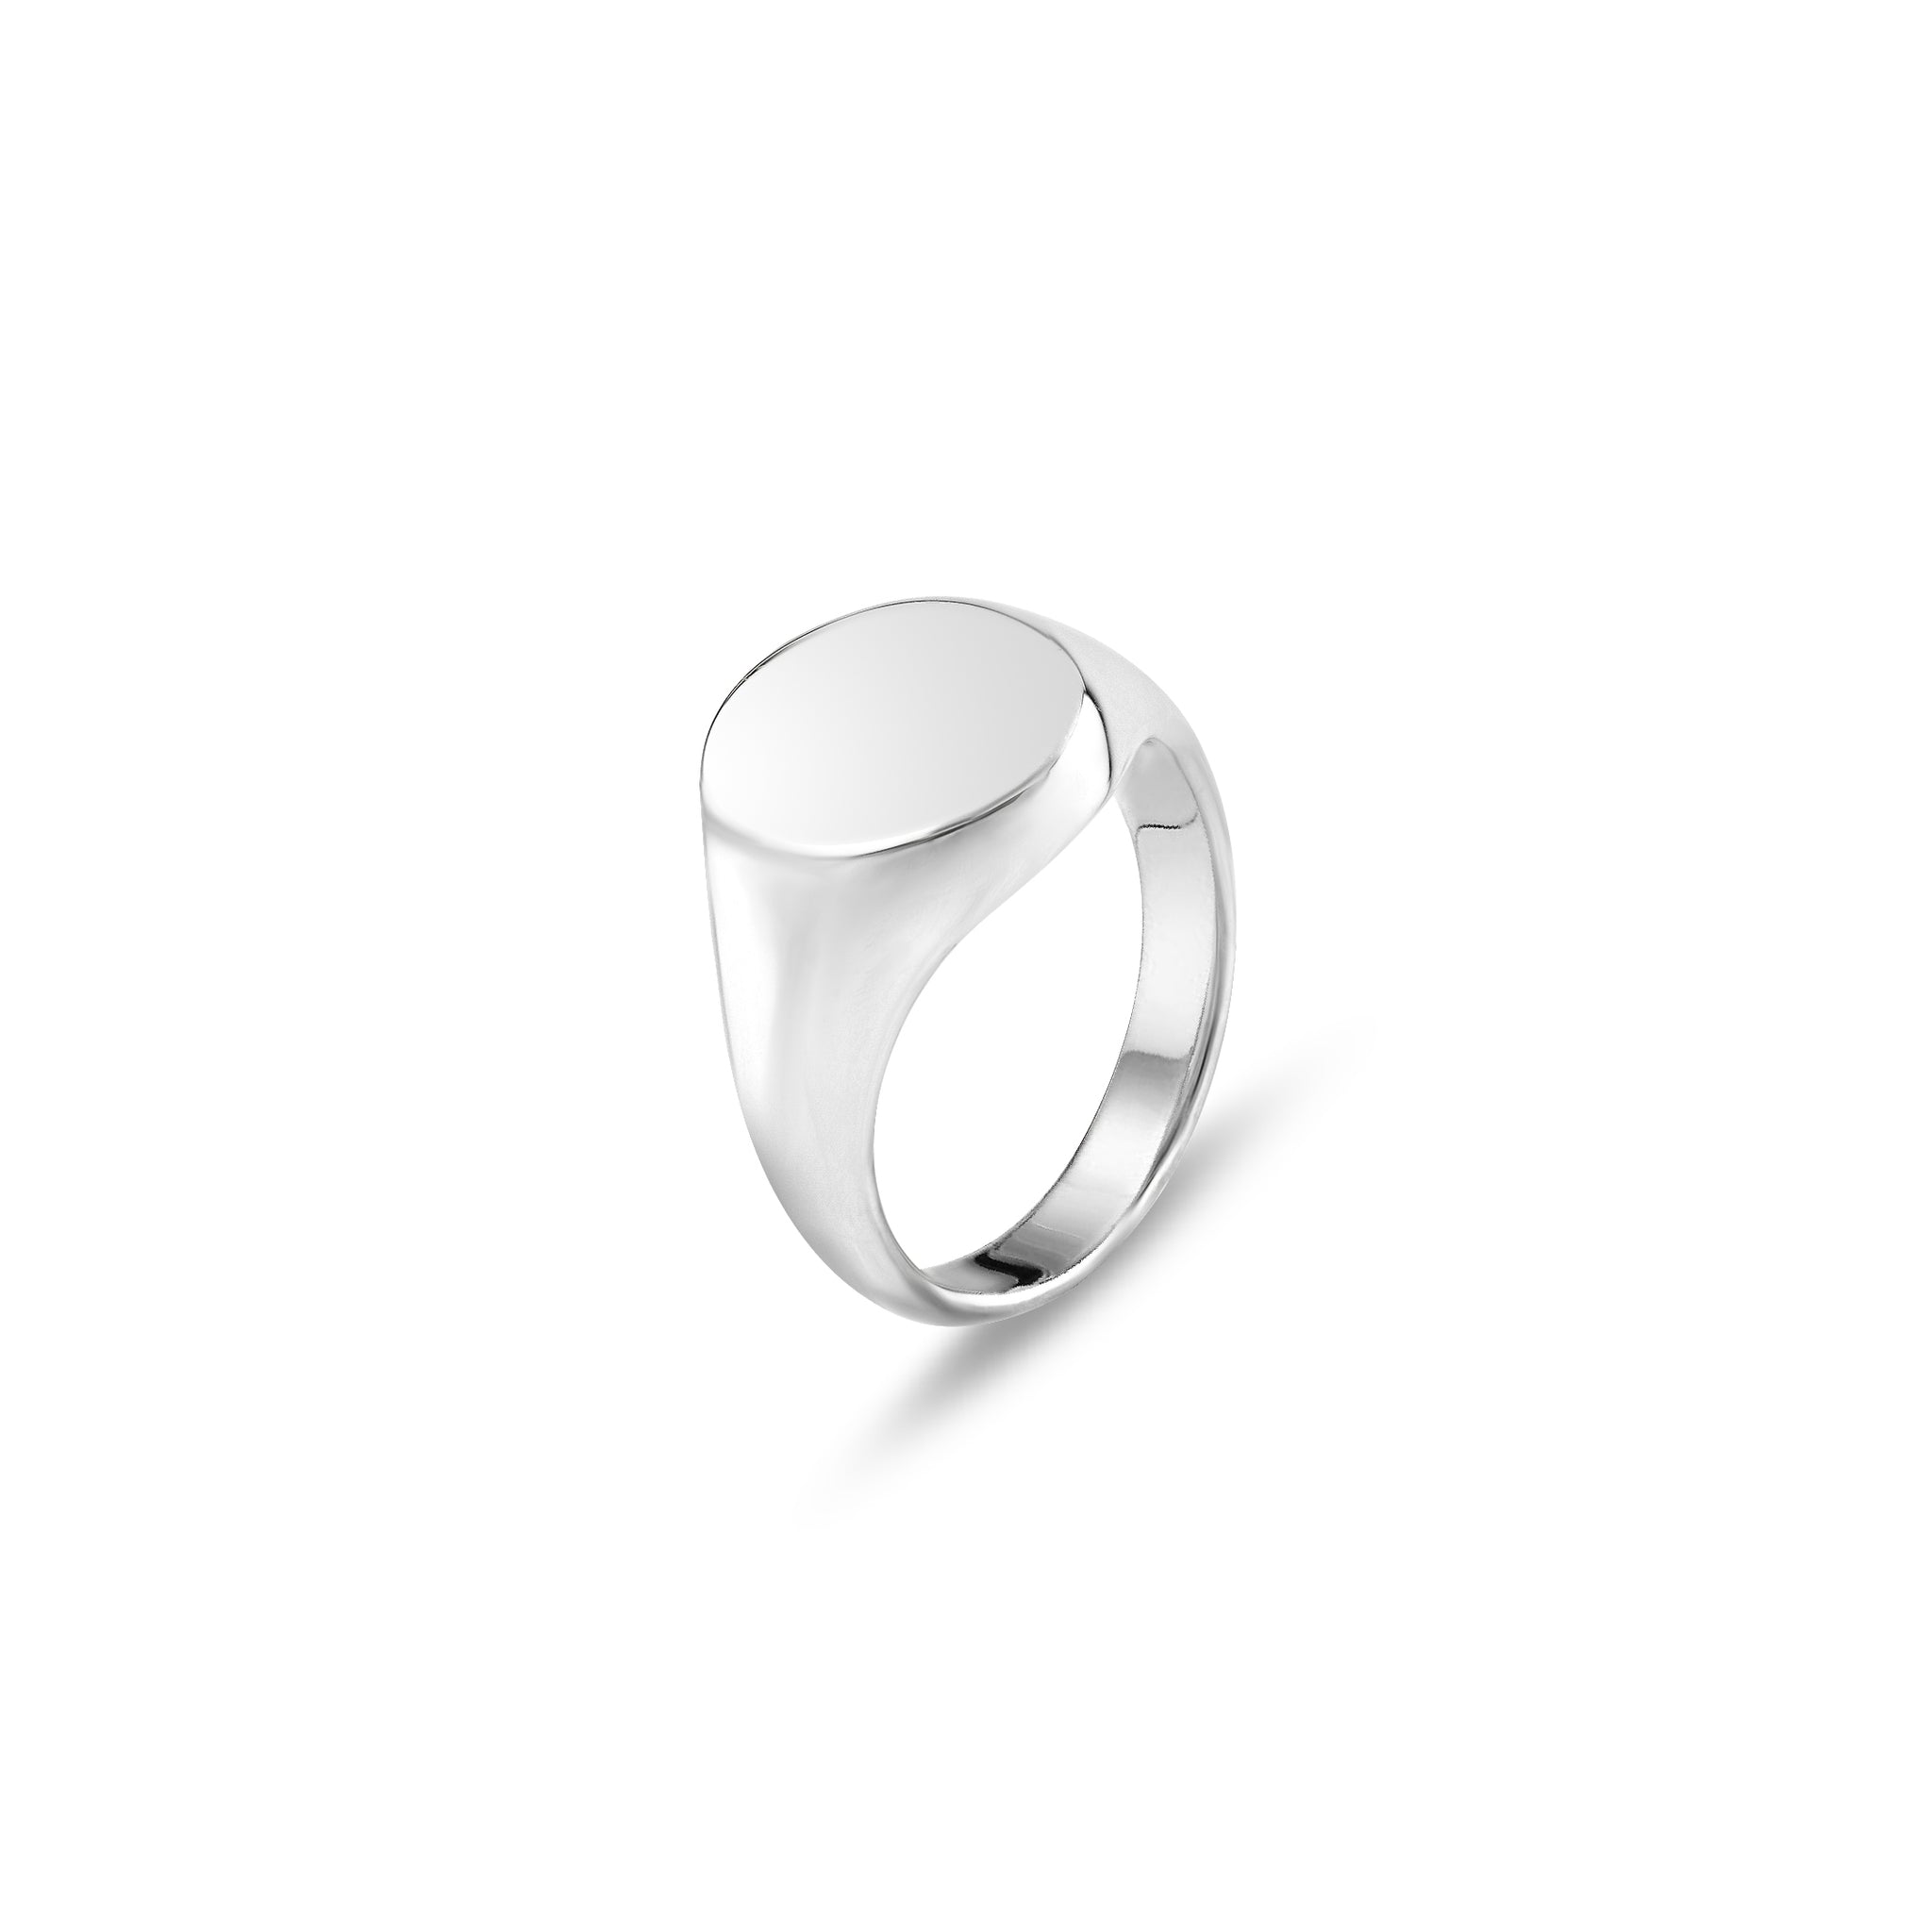 18ct White Gold 14 x 12mm Oval Signet Ring